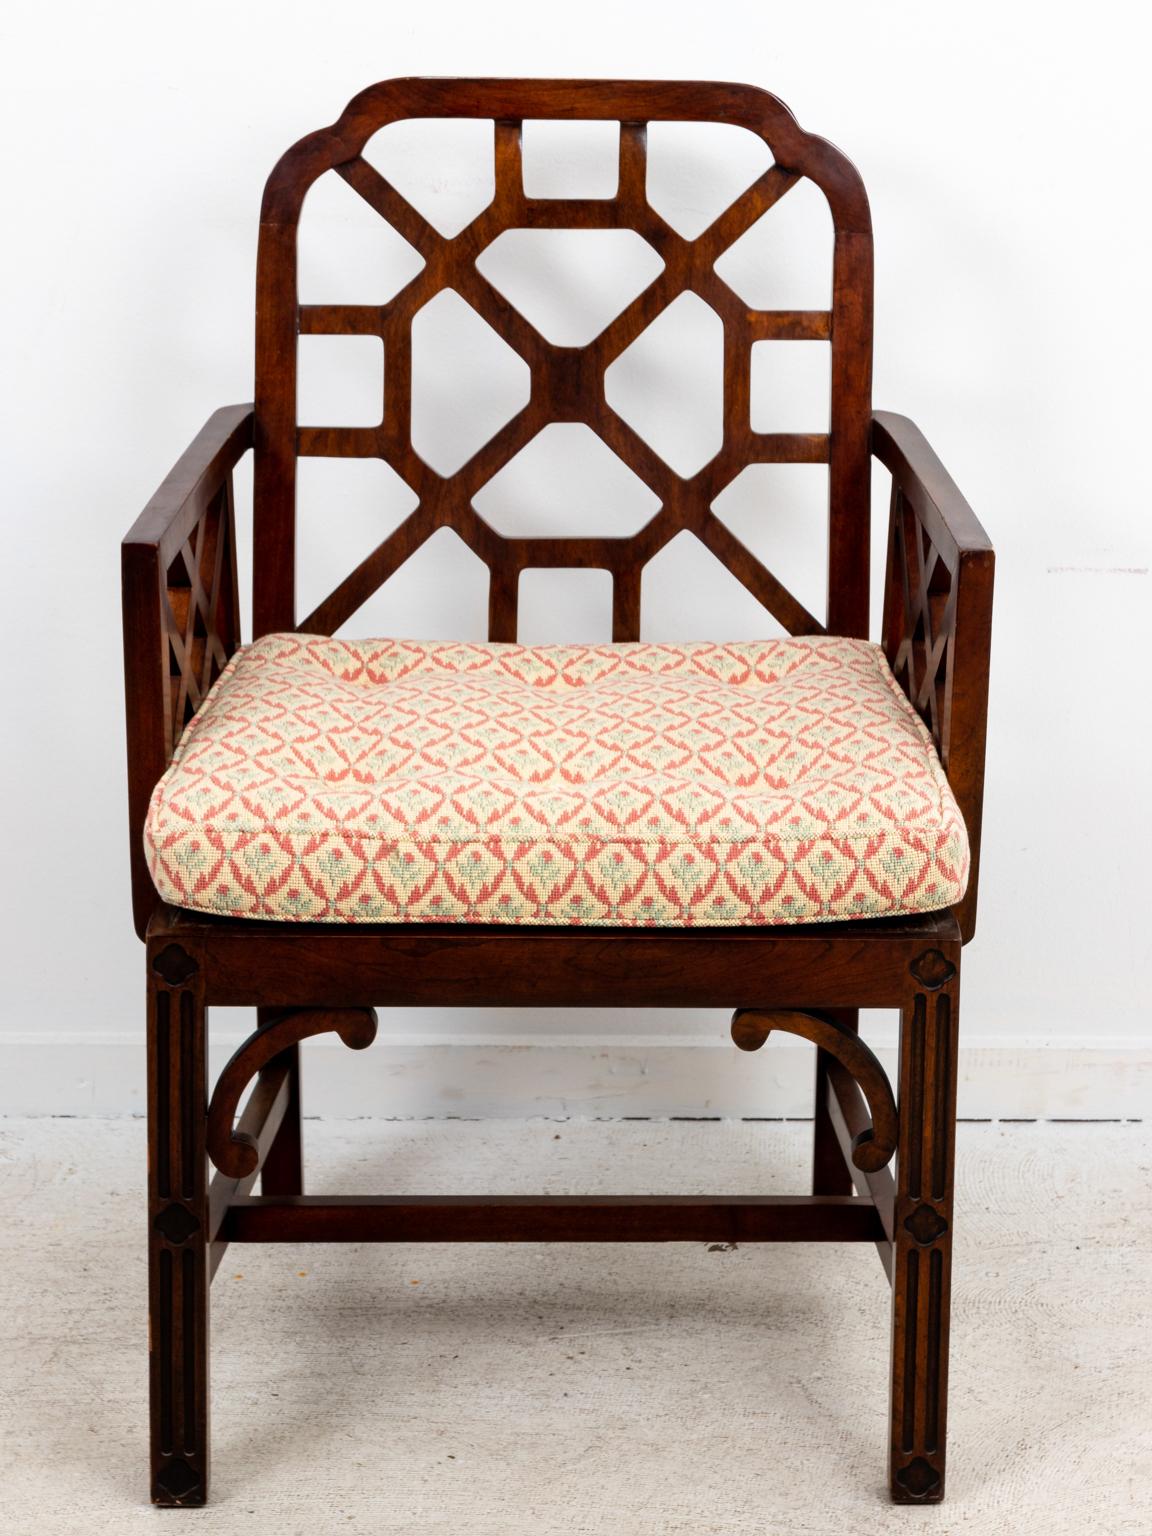 Set of four upholstered Chinese Chippendale style chairs with h-shaped cross stretchers and geometric Chinese Chippendale style tracery on the seat back. Please note of wear consistent with age including minor finish loss. The listed measurements